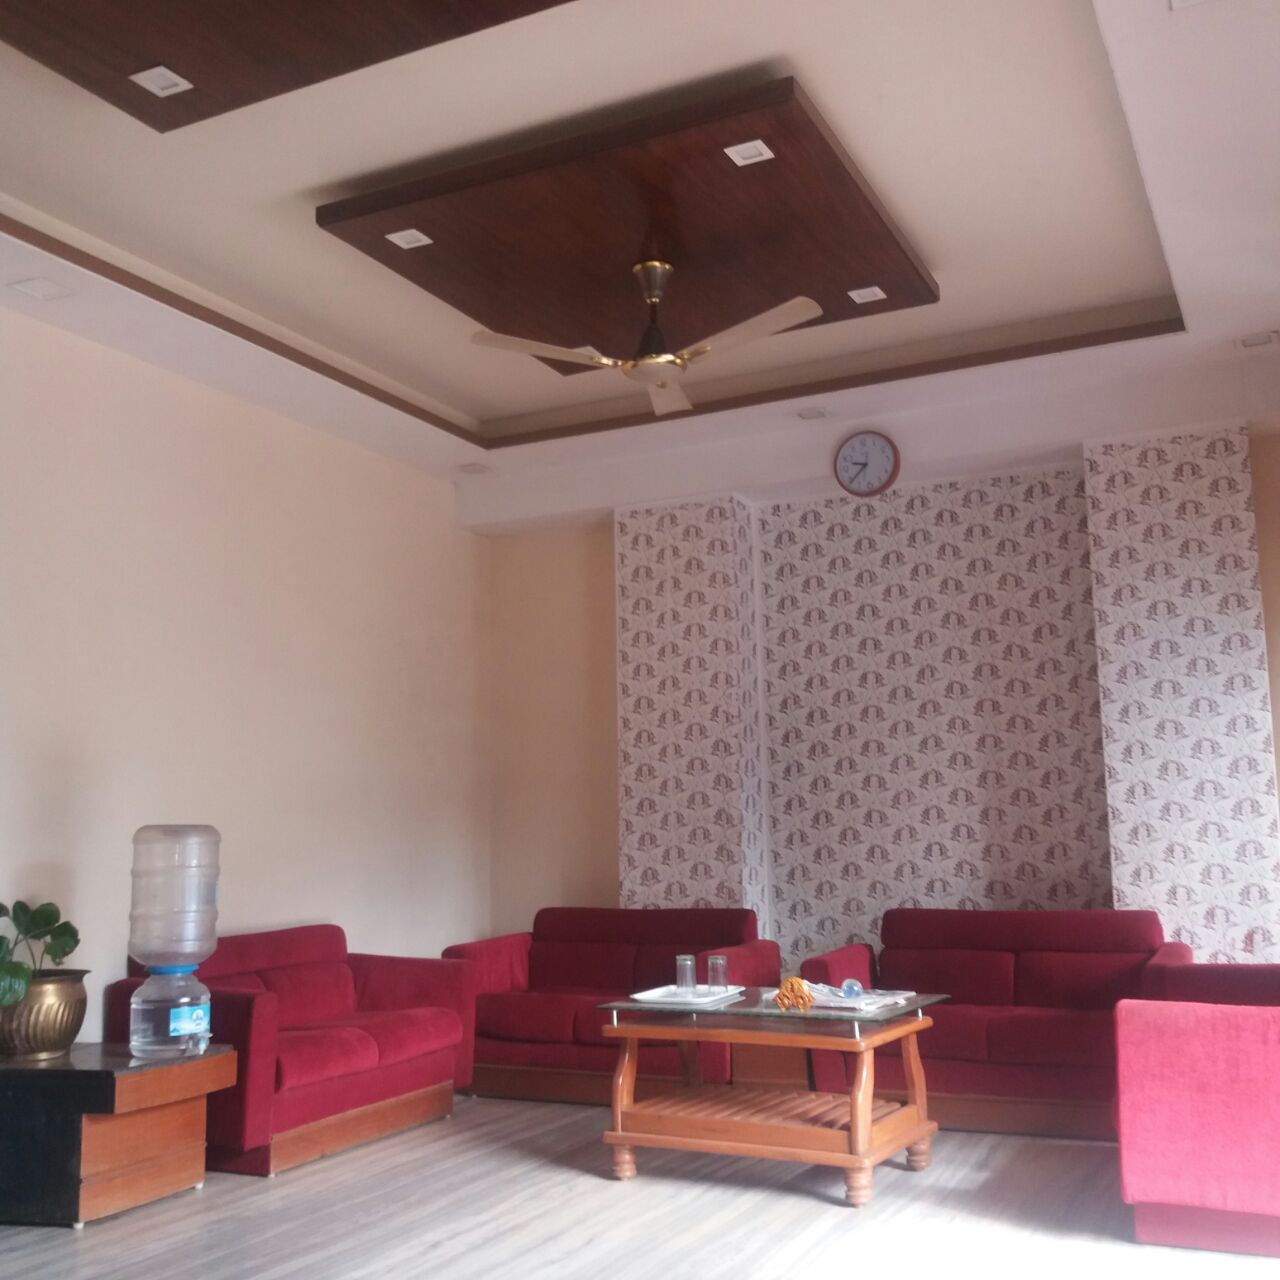 Learn New Things: Budget Beautiful False Ceiling Design ...